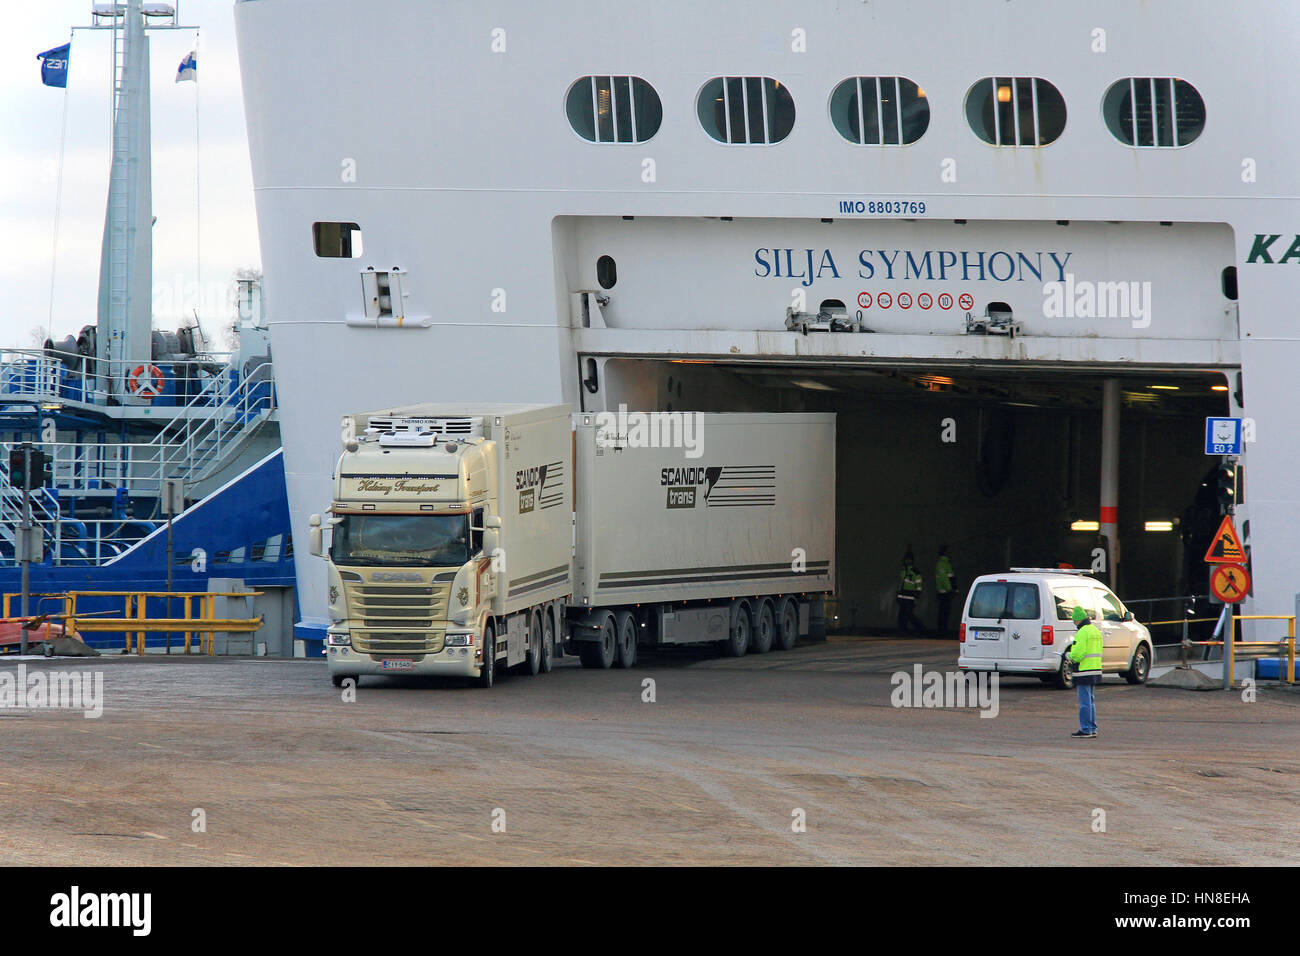 HELSINKI, FINLAND - JANUARY 25, 2017: Scania truck and refrigerator trailers of Helsing Transport drives out of Silja Symphony ferry at Helsinki South Stock Photo